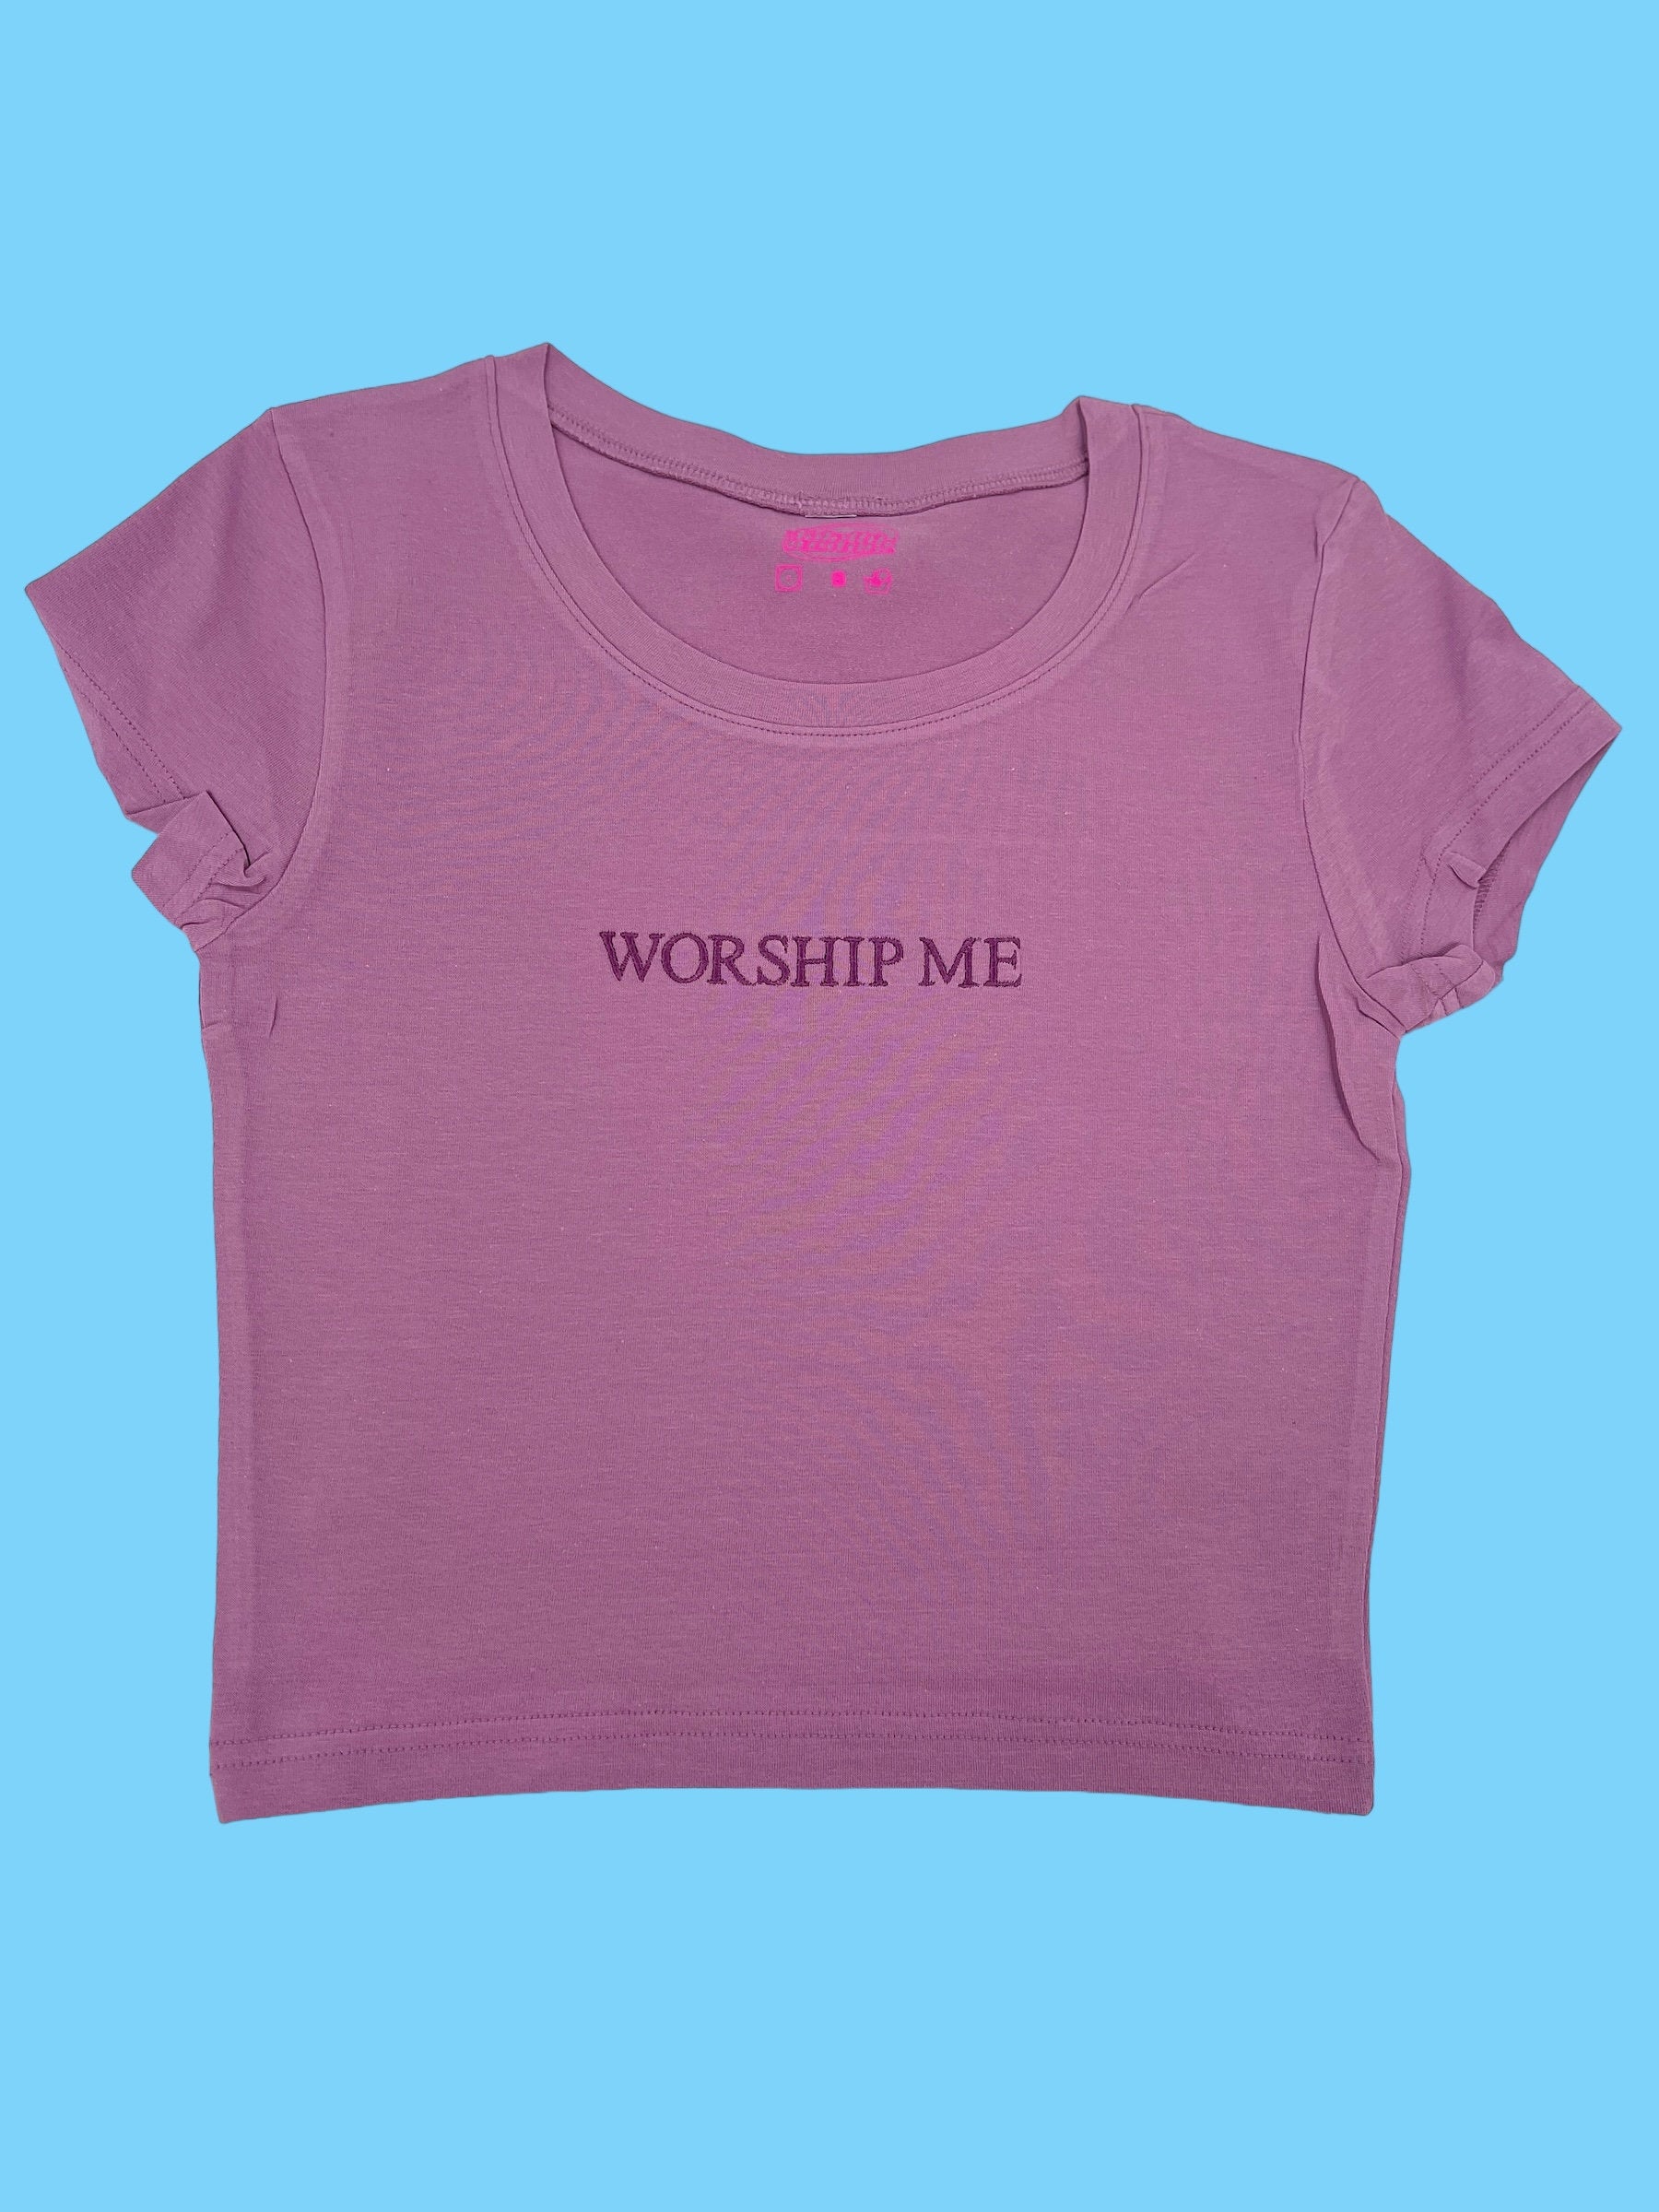 a pink shirt that says worship me on it